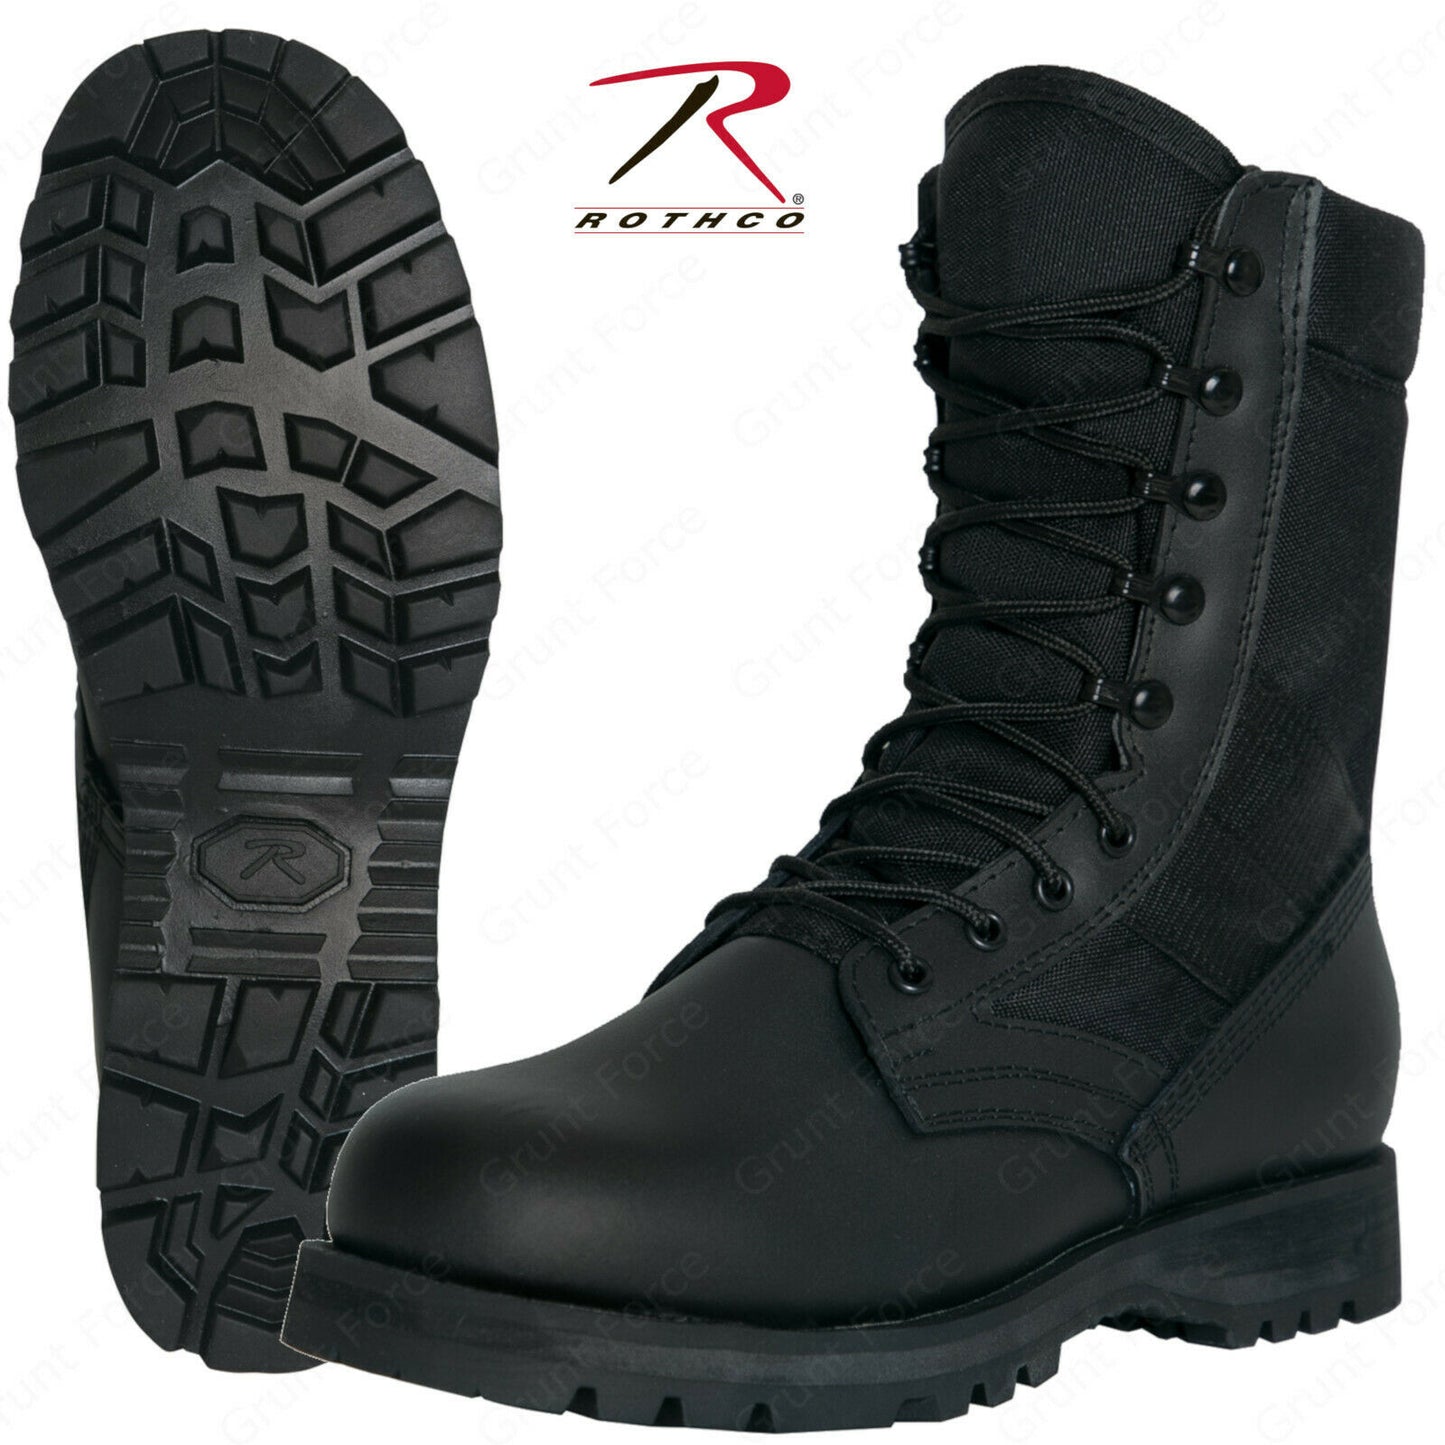 Rothco G.I. Type Sierra Sole Black Tactical Boots - Footwear